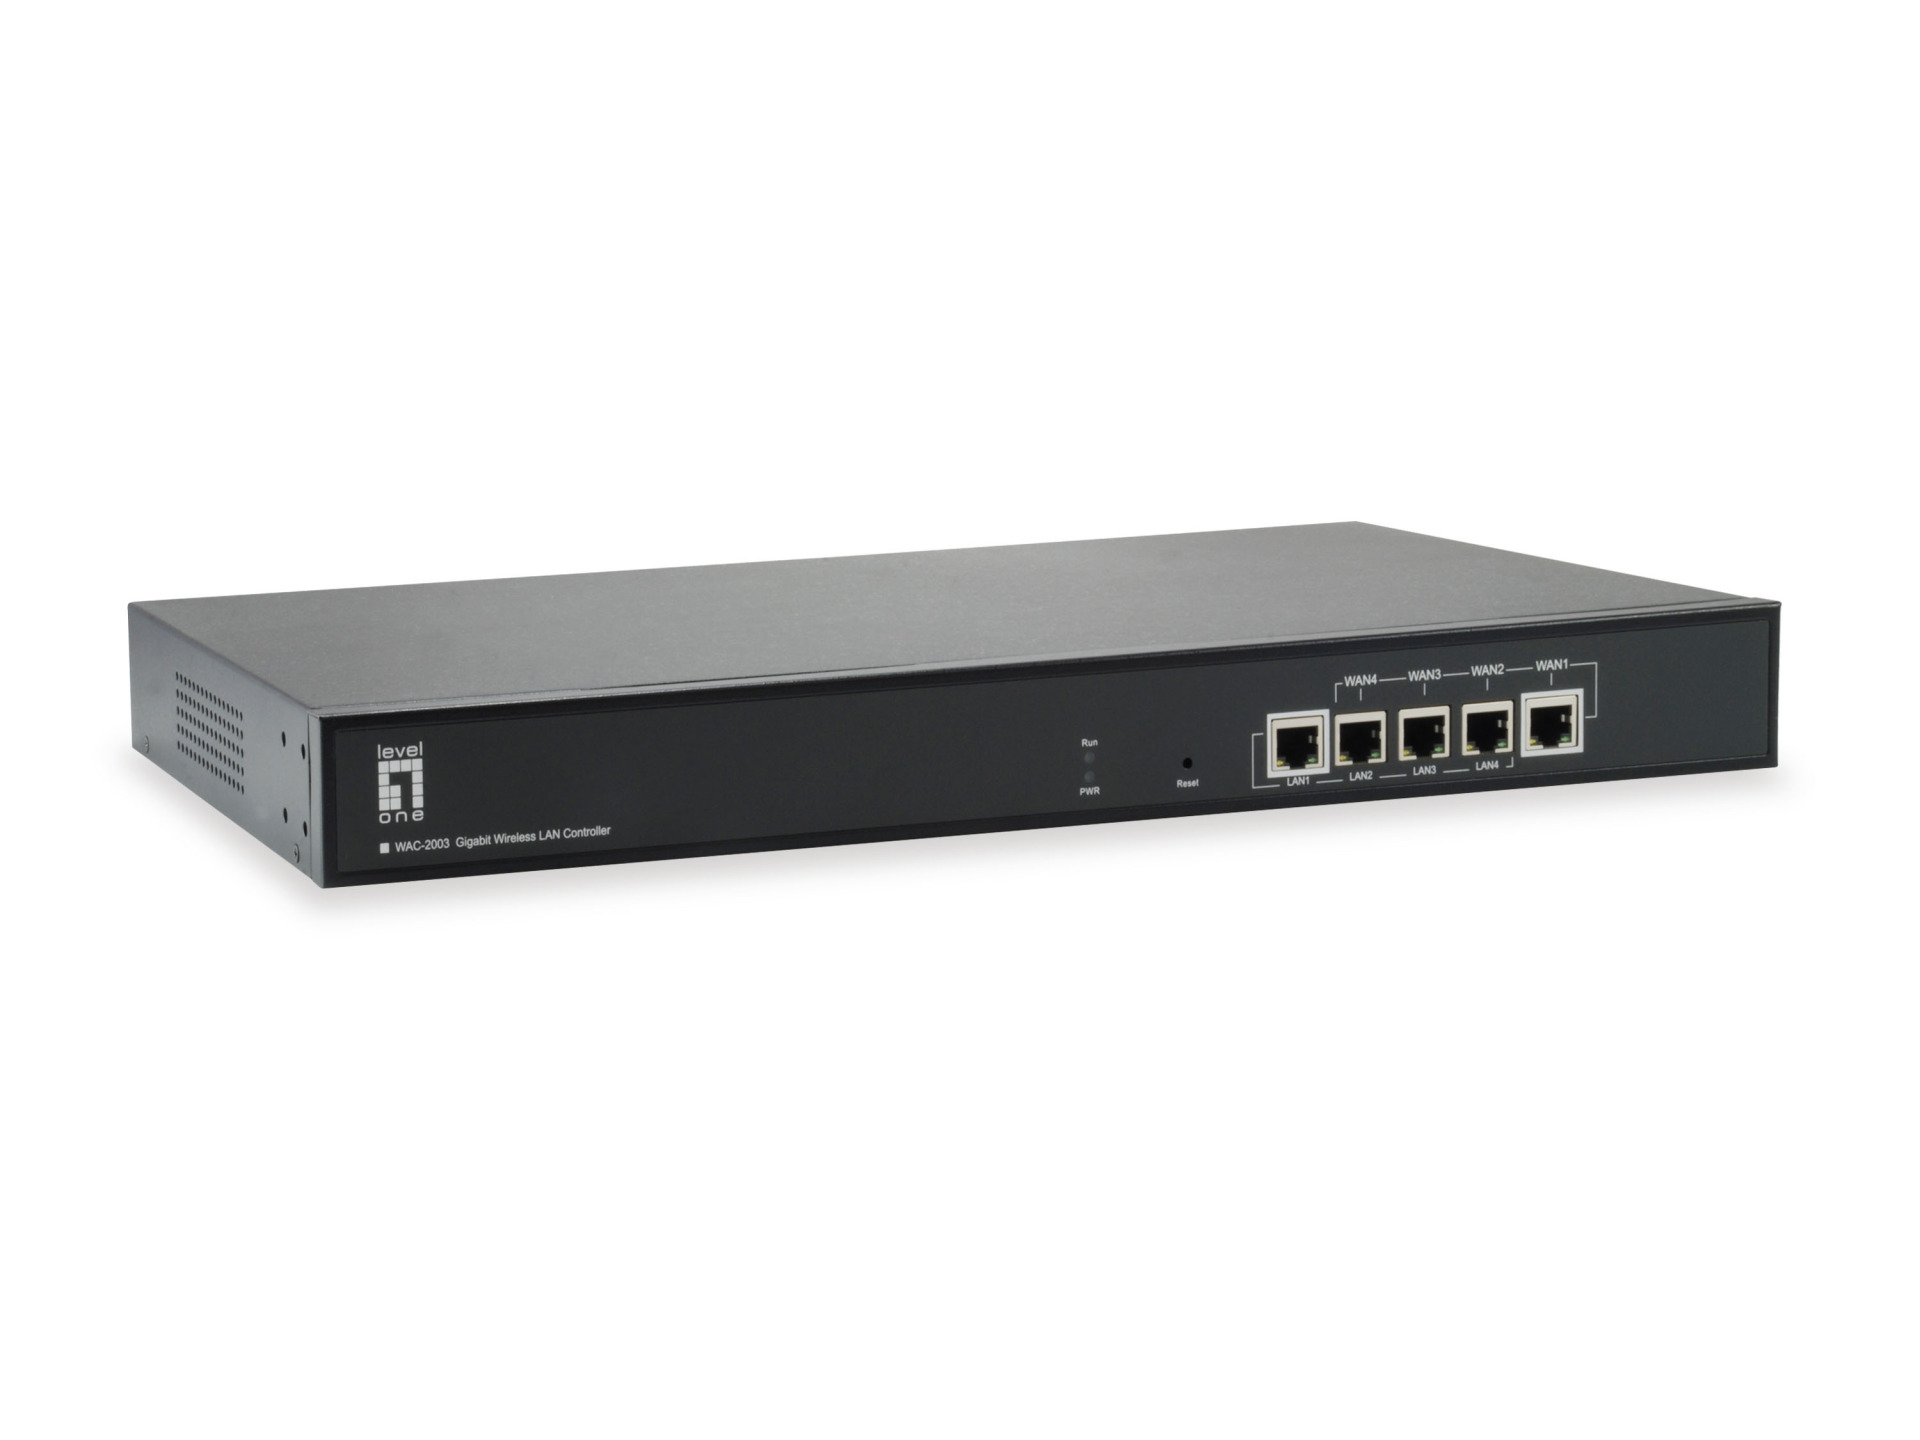 Gigabit Wireless LAN-Controller for up to 300 Managed Access-Points